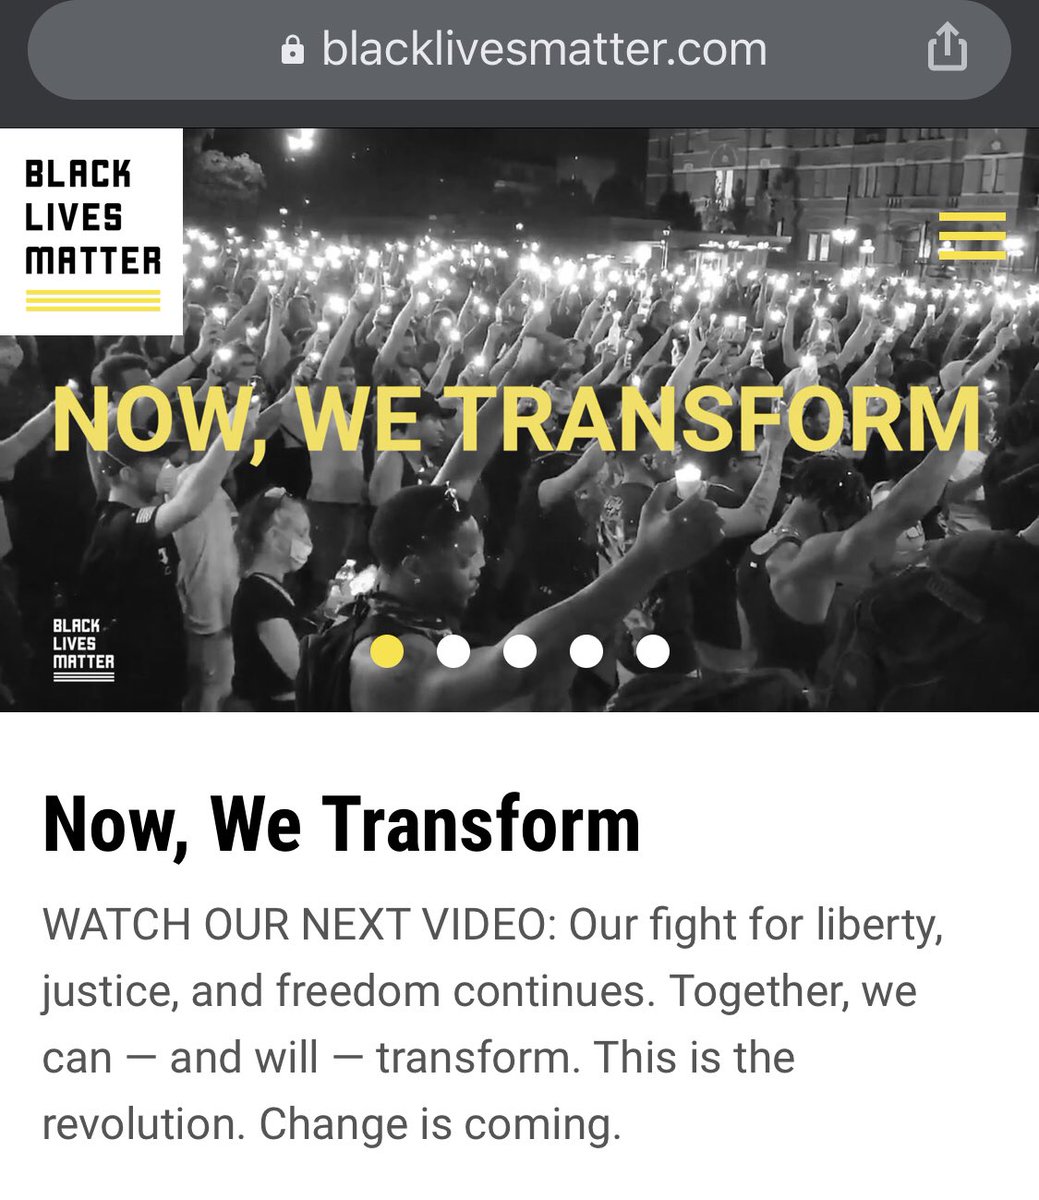  https://blacklivesmatter.com Next click 'donate'.Taken here: https://secure.actblue.com/donate/ms_blm_homepage_2019Who is ActBlue? https://secure.actblue.com Powering Democratic candidates, committees, parties,organization [D] party funding?ALL DONATIONS TO BLM [ http://BLM.com ] https://www.opensecrets.org/pacs/expenditures.php?cycle=2020&cmte=C00401224